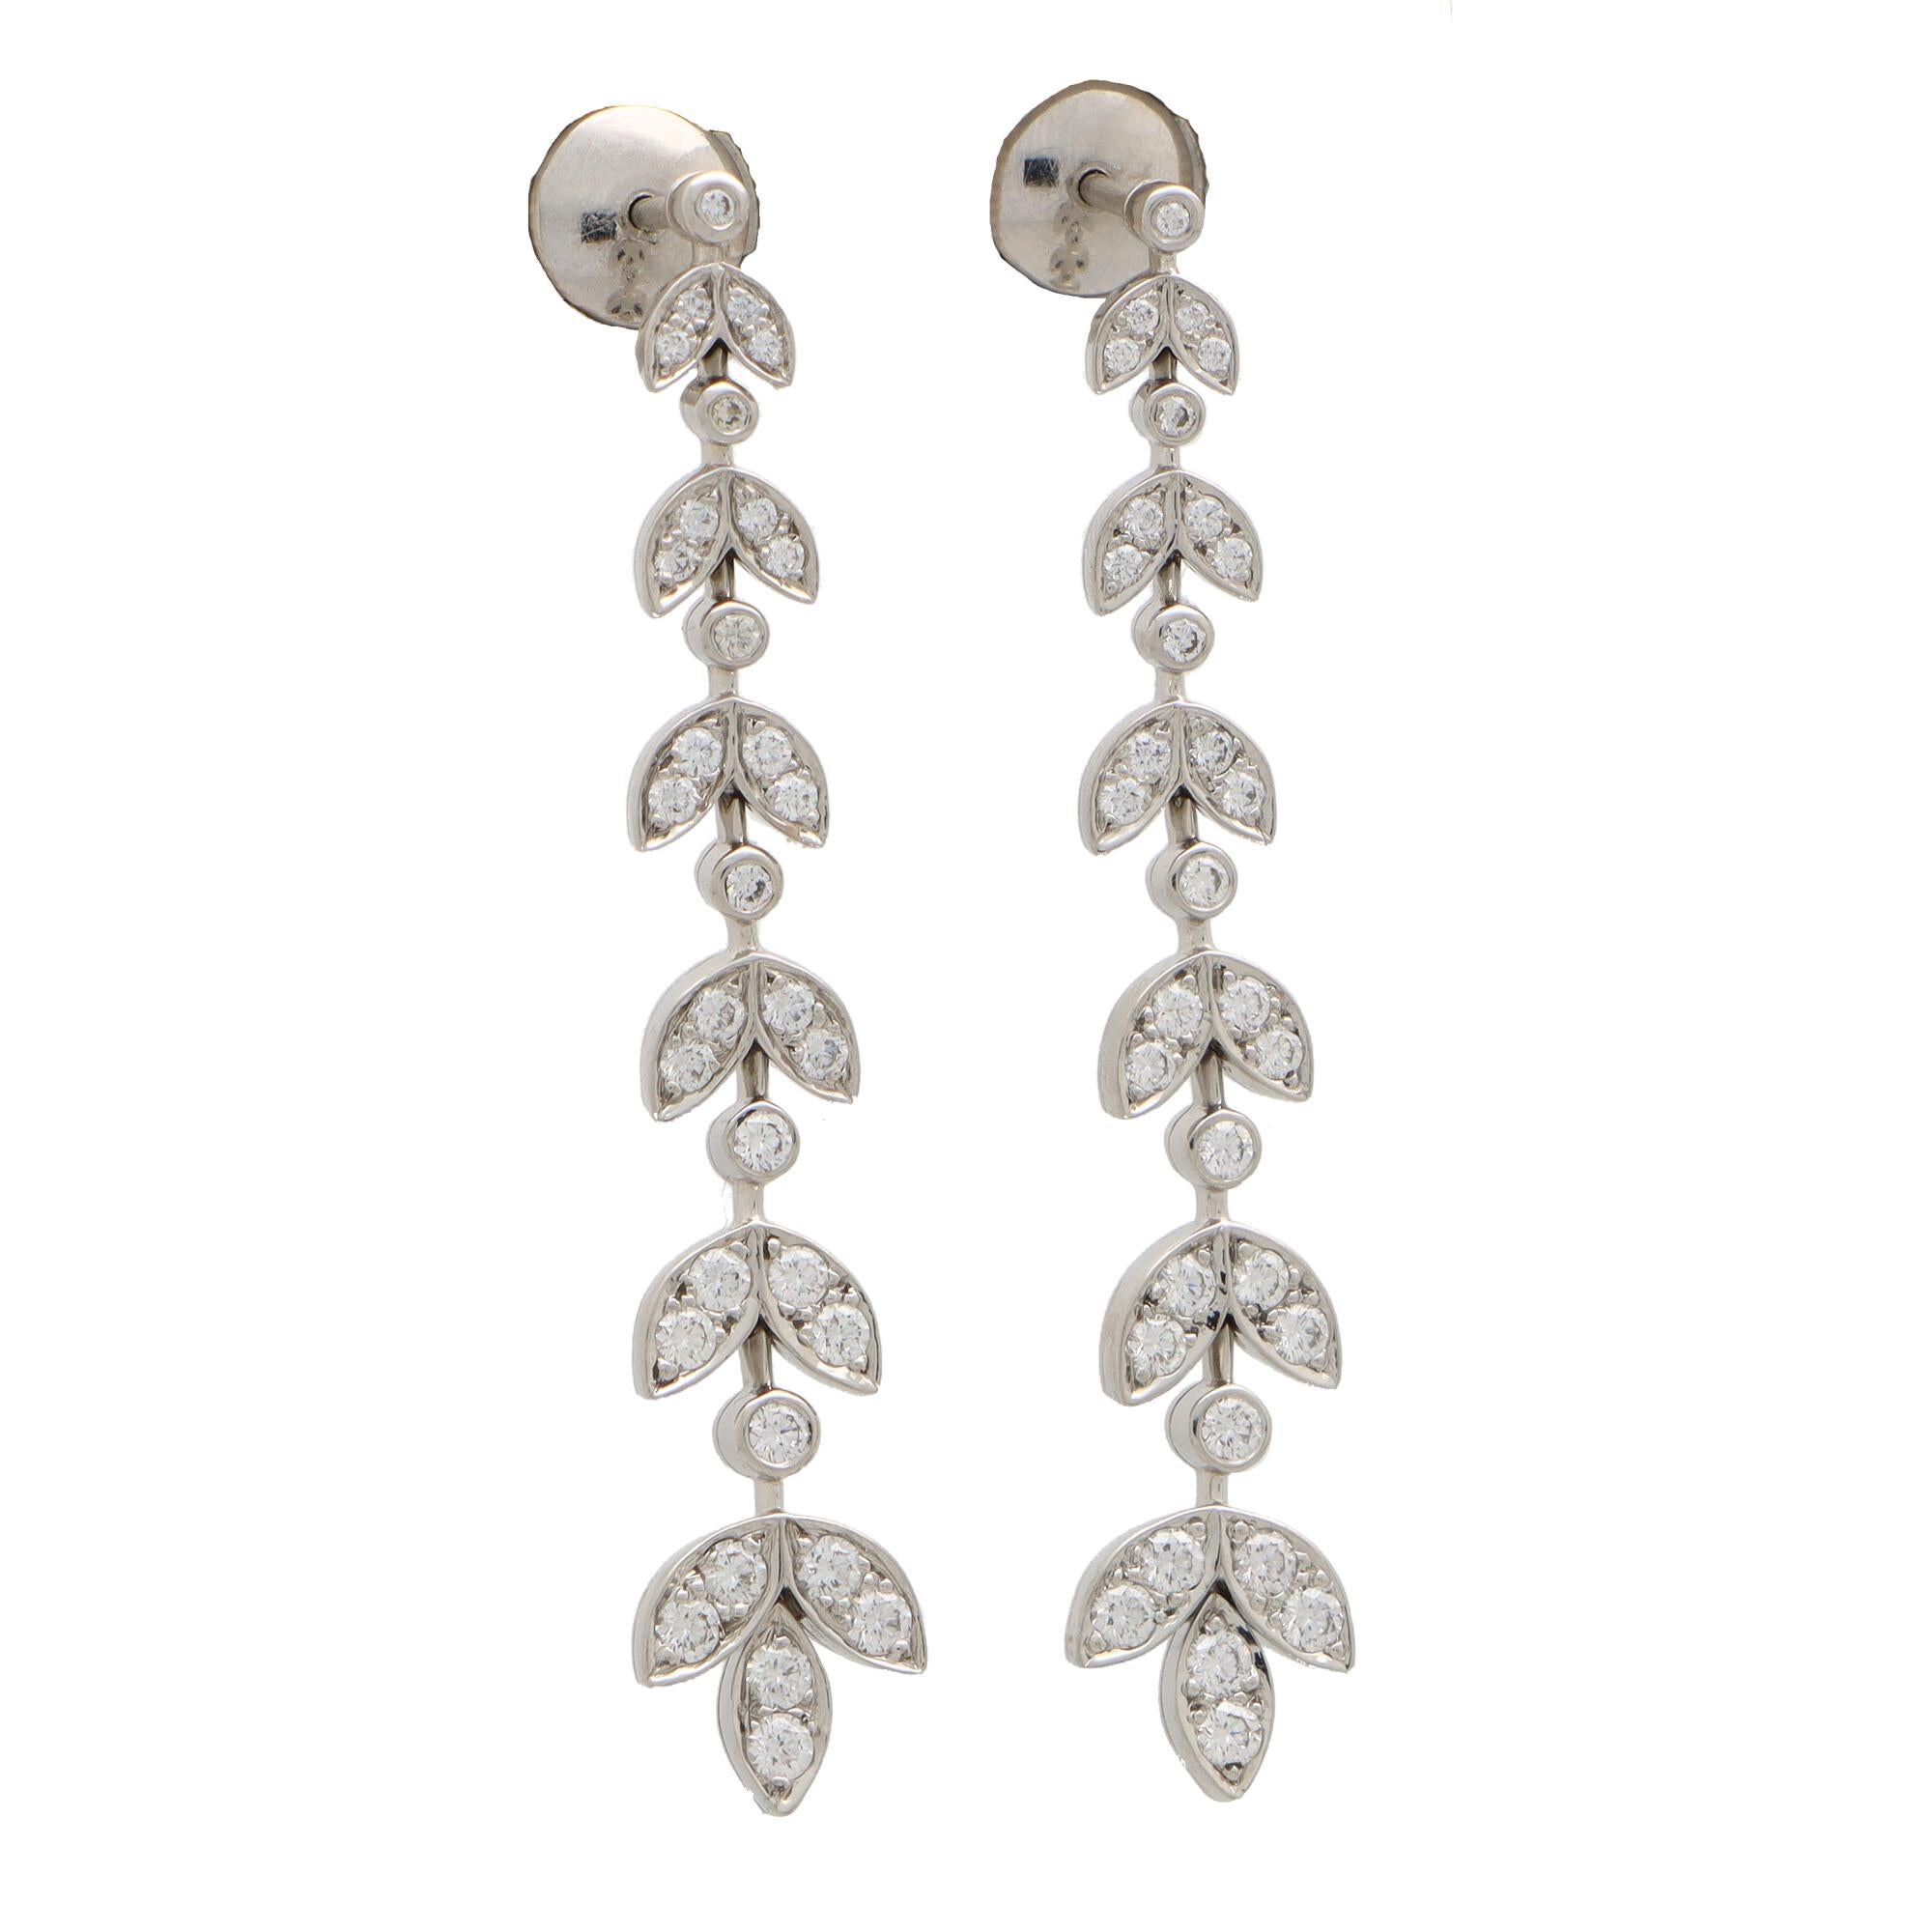 A beautiful pair of vintage Tiffany & Co. ‘Wisteria’ earrings set in platinum.

From the now discontinued ‘Wisteria’ collection, each earring depicts an elegant graduating wisteria branch. Each branch is intricately set with round brilliant cut